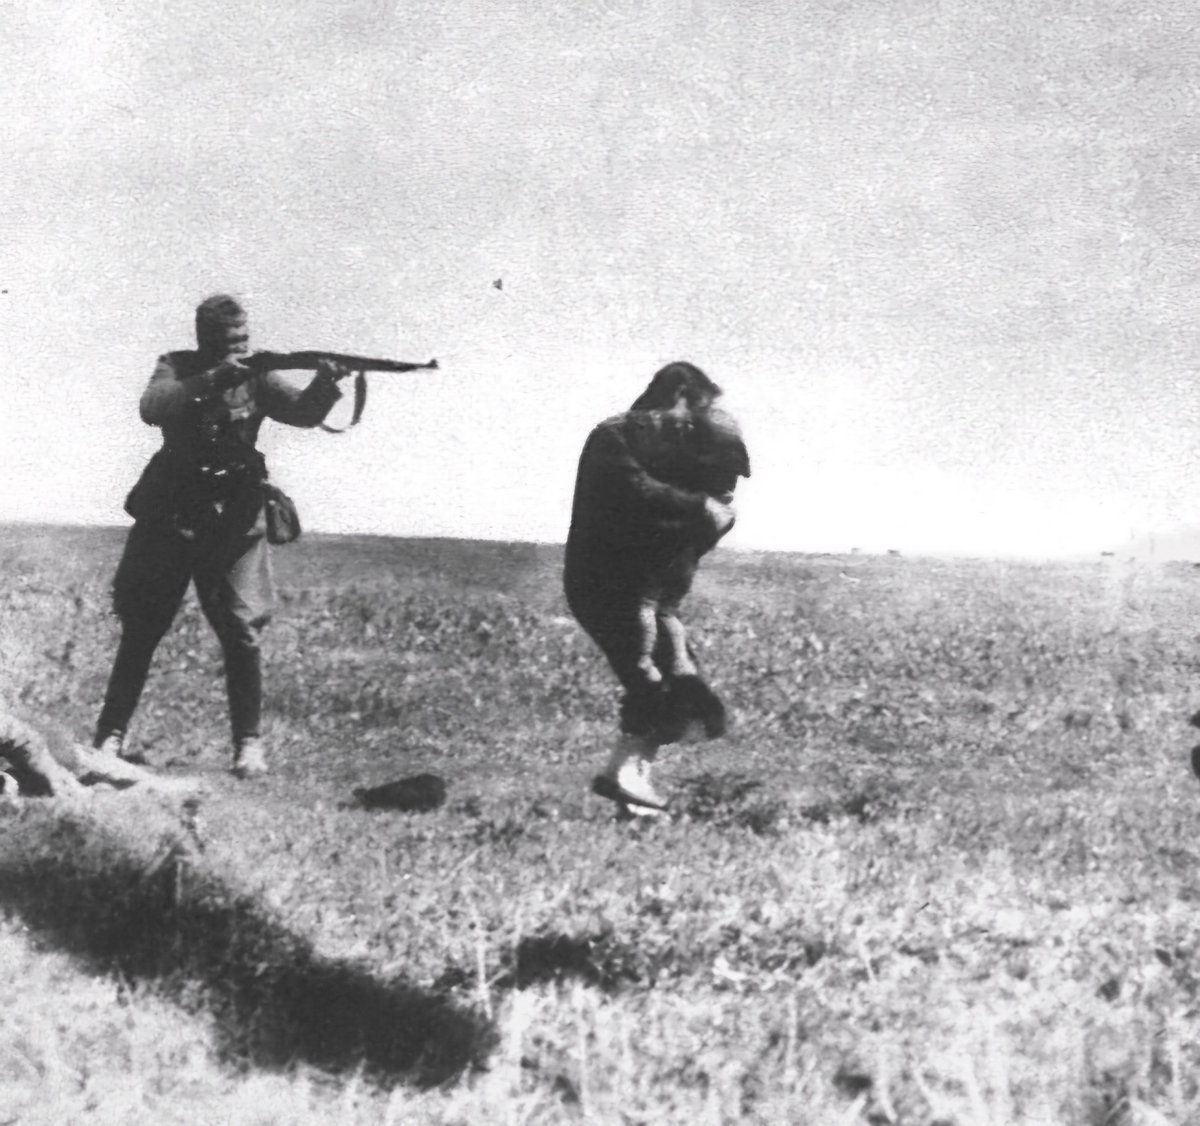 NEVER FORGET: An Einsatzgruppen soldier shoots a Jewish mother protecting her child in Ivangorod, Ukraine in 1942.

On October 7, Hamas Nazis murdered children in front of their parents and parents in front of their children.

We remeber and vow NEVER AGAIN IS NOW. #YomHaShoah